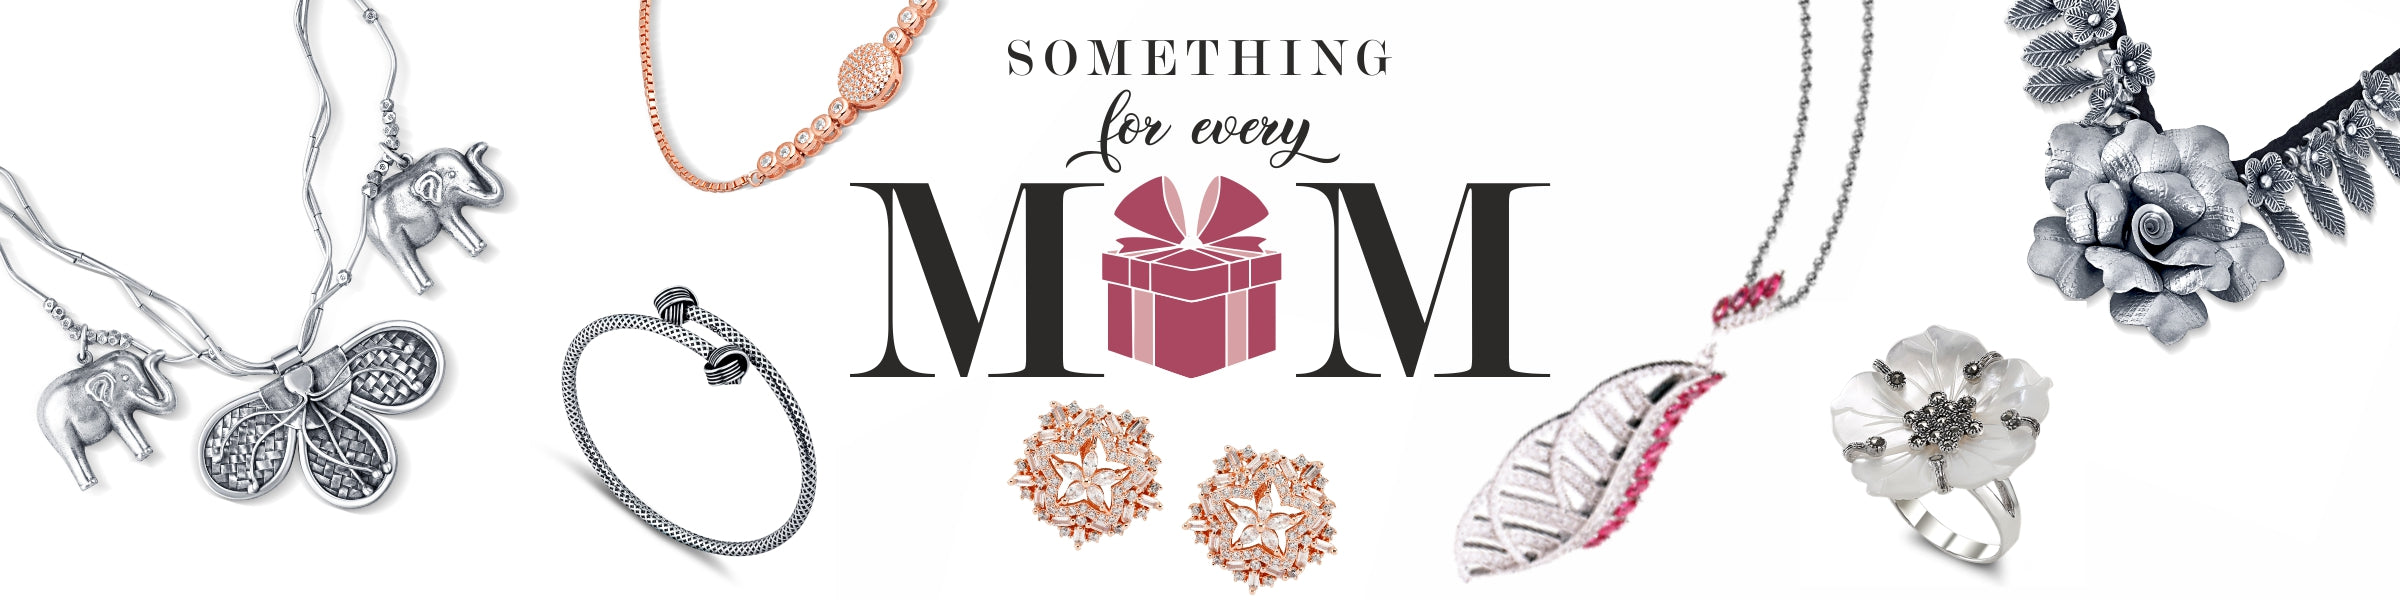 Something for Every Mother- A gift guide for Mothers Day